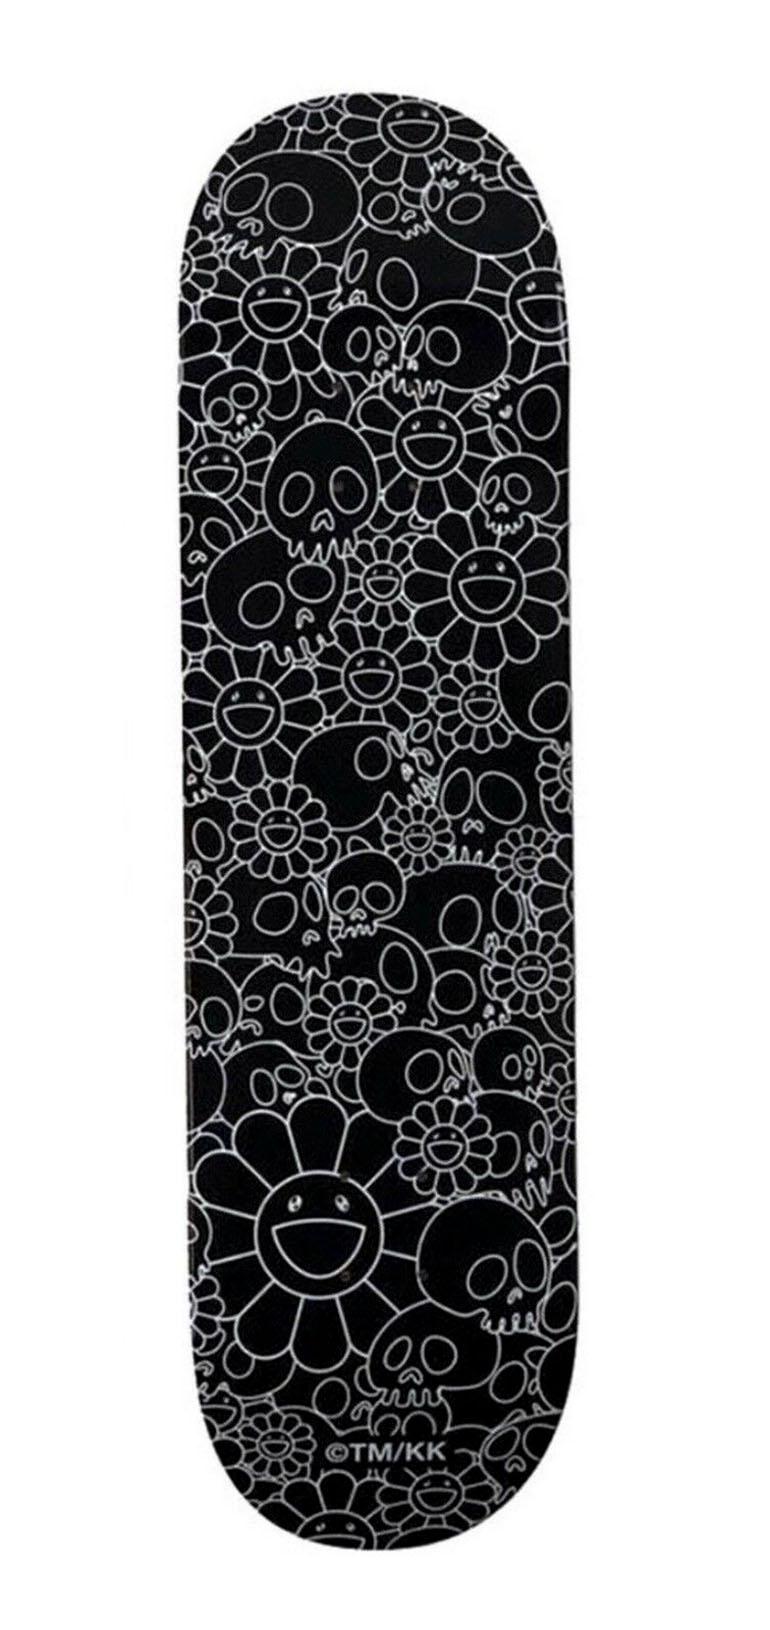 Takashi Murakami Flowers & Skulls Skateboard Deck (Black and White):
A vibrant piece of Takashi Murakami wall art produced as a limited series in 2018 in conjunction with Complexcon and Kaikai Kiki co. This deck is new in its original packaging.